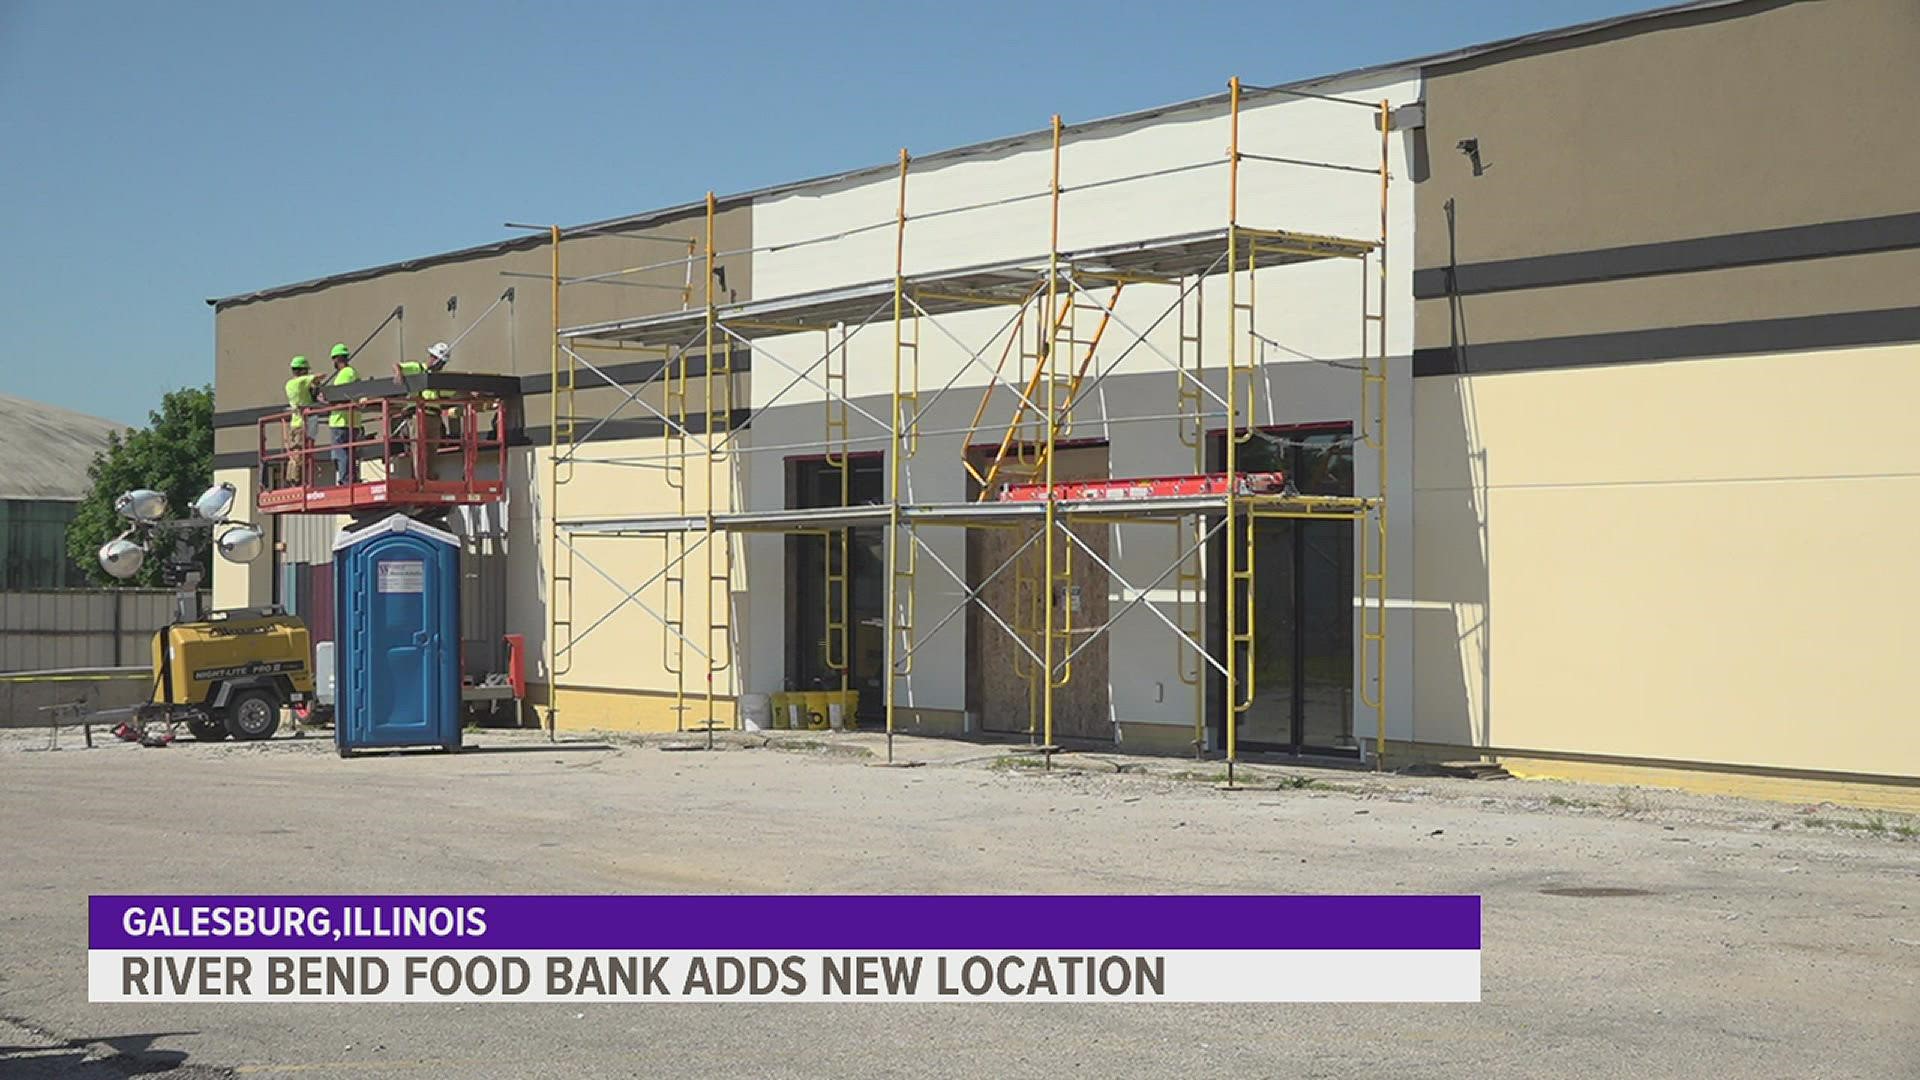 The non-profit paired with Galesburg Community Foundation and Fish Food Bank on the project.